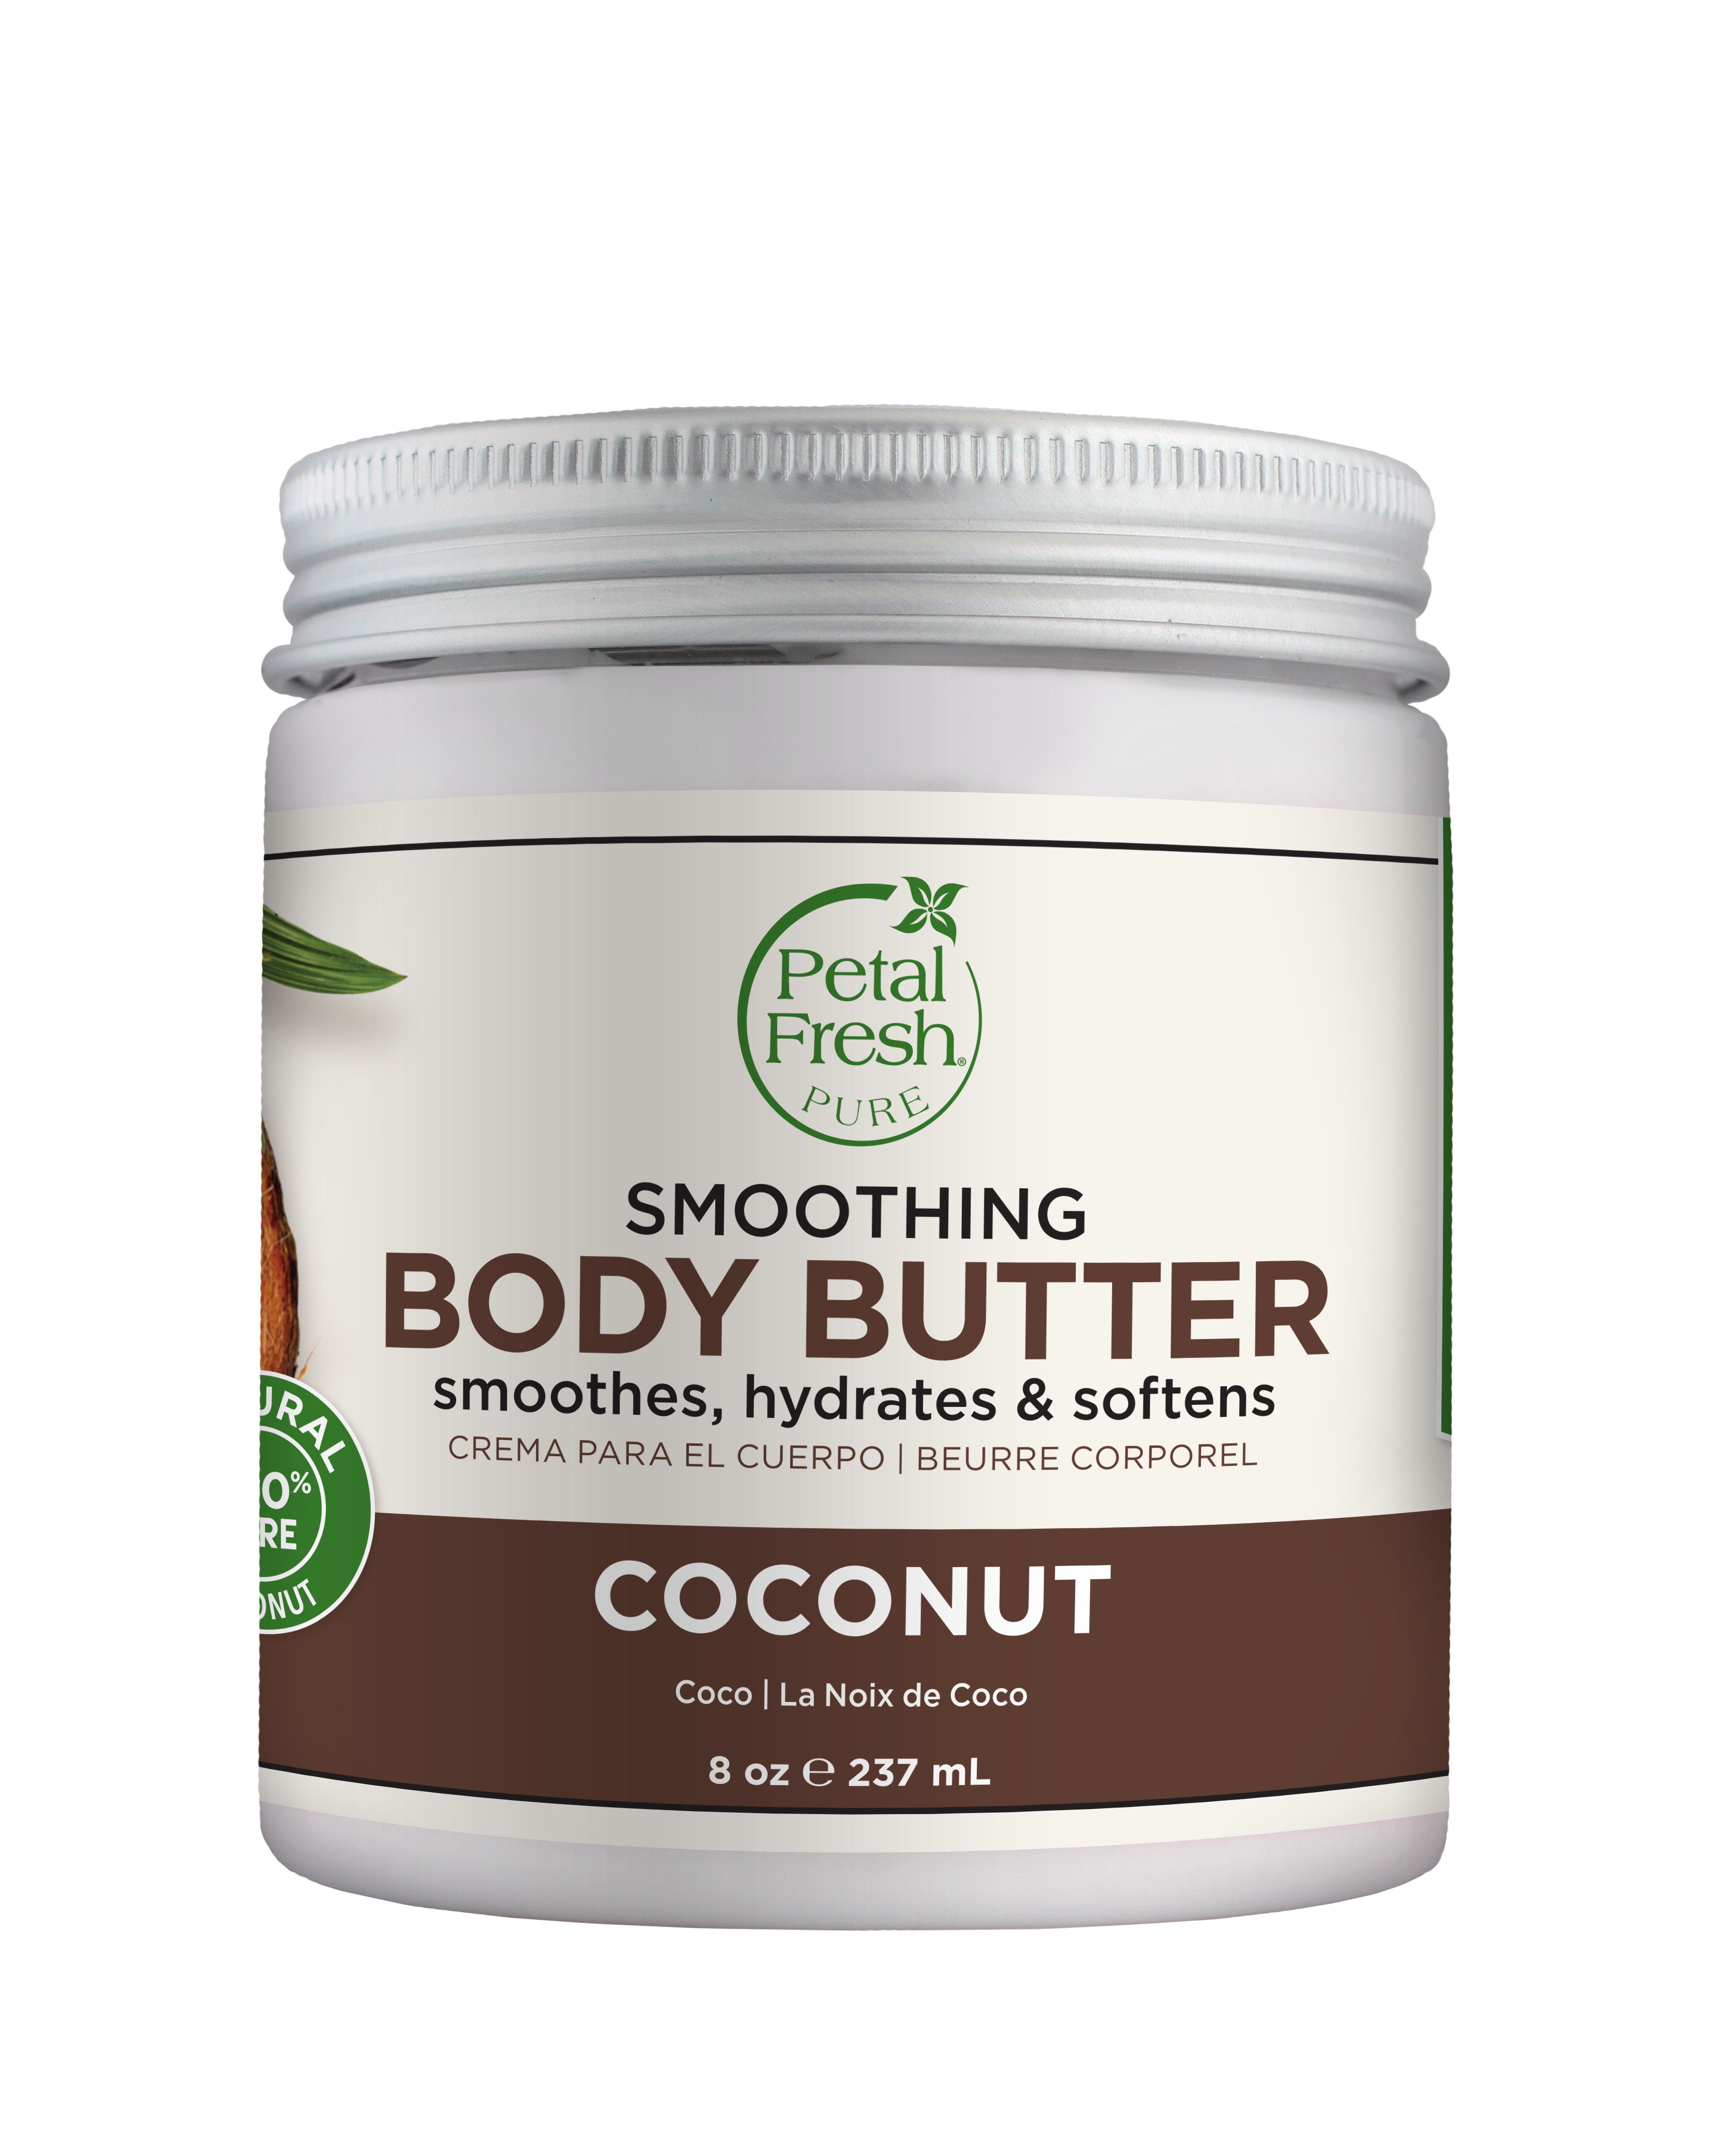 Petal Fresh Pure Coconut Body Butter by Bio Creative Labs